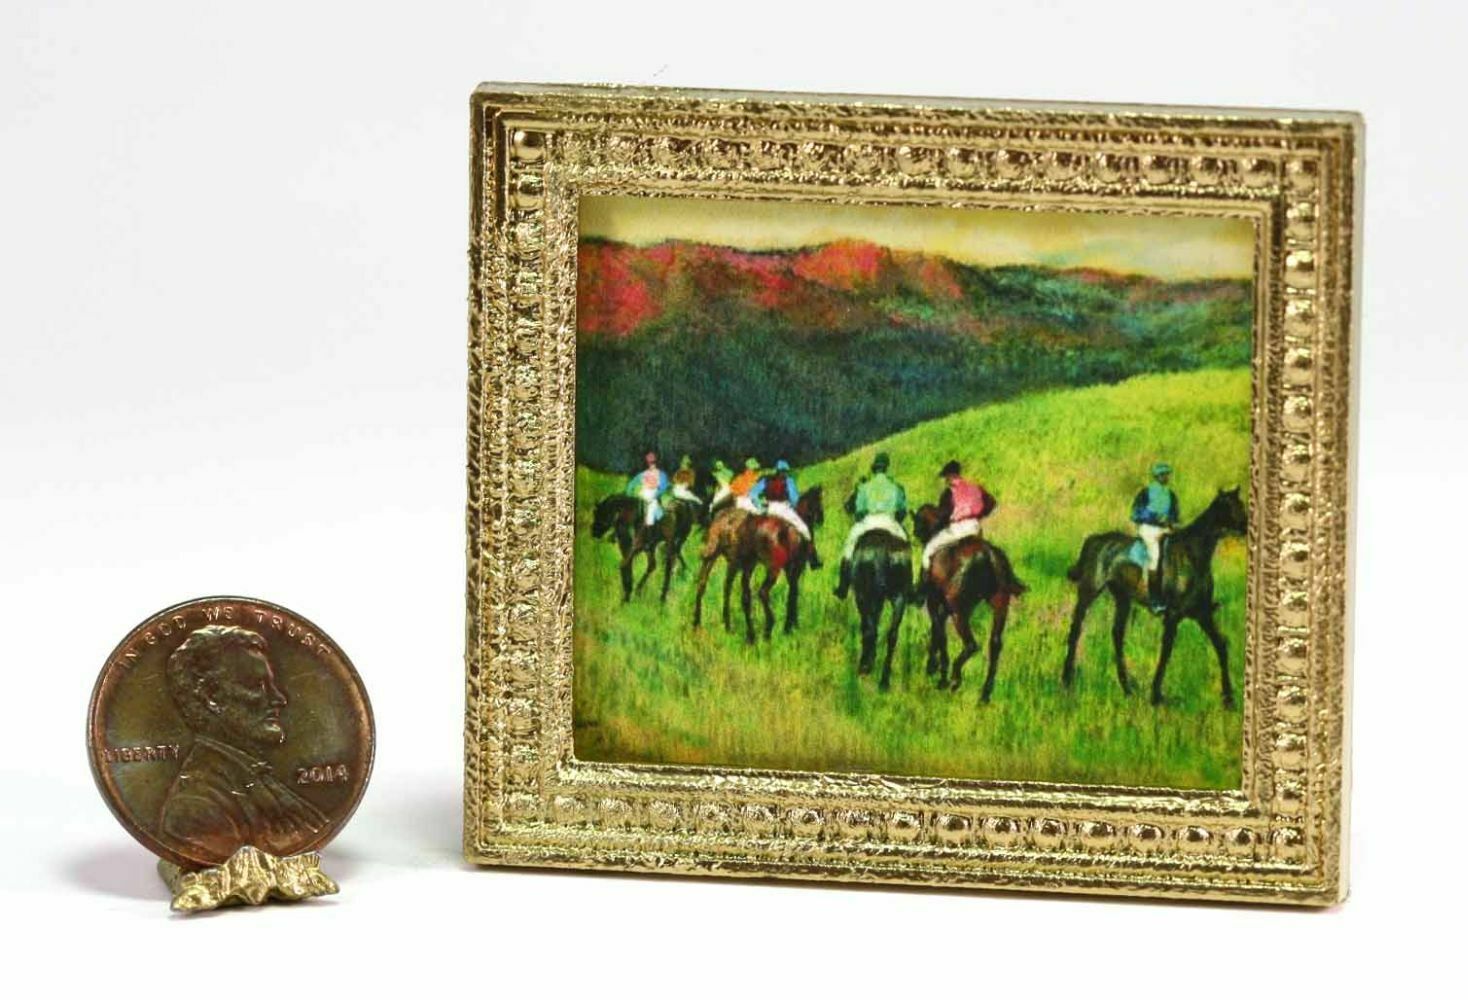 *sale* Miniature 1:12 Scale Artwork Print Of A Degas Equestrian Painting